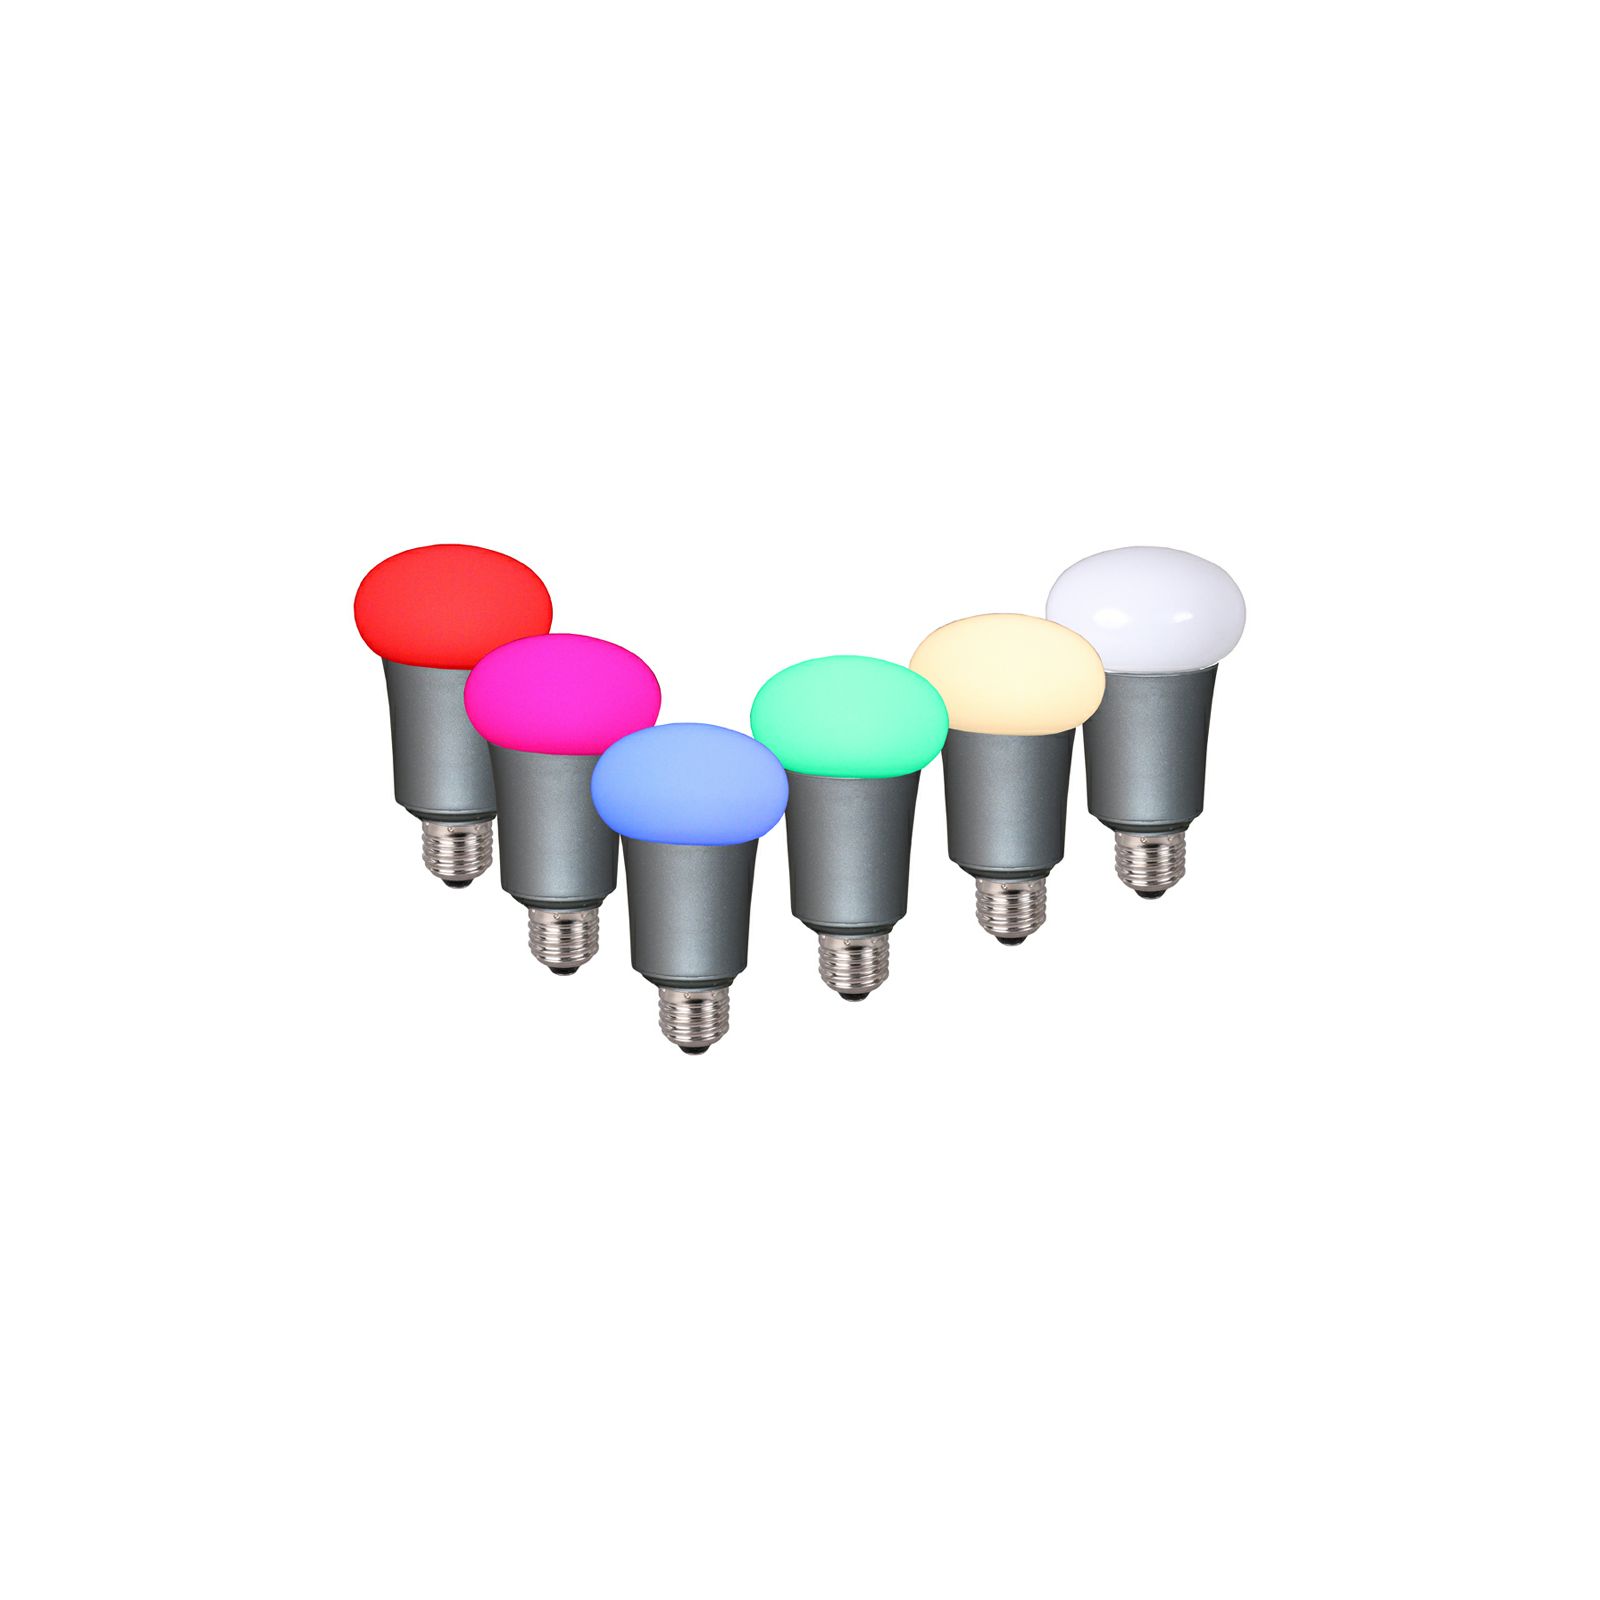 Patona Smart LED E27 Color changing Bluetooth 7W 110x60mm 1955lm 2700K 230V/50-60Hz A+ iOS Android